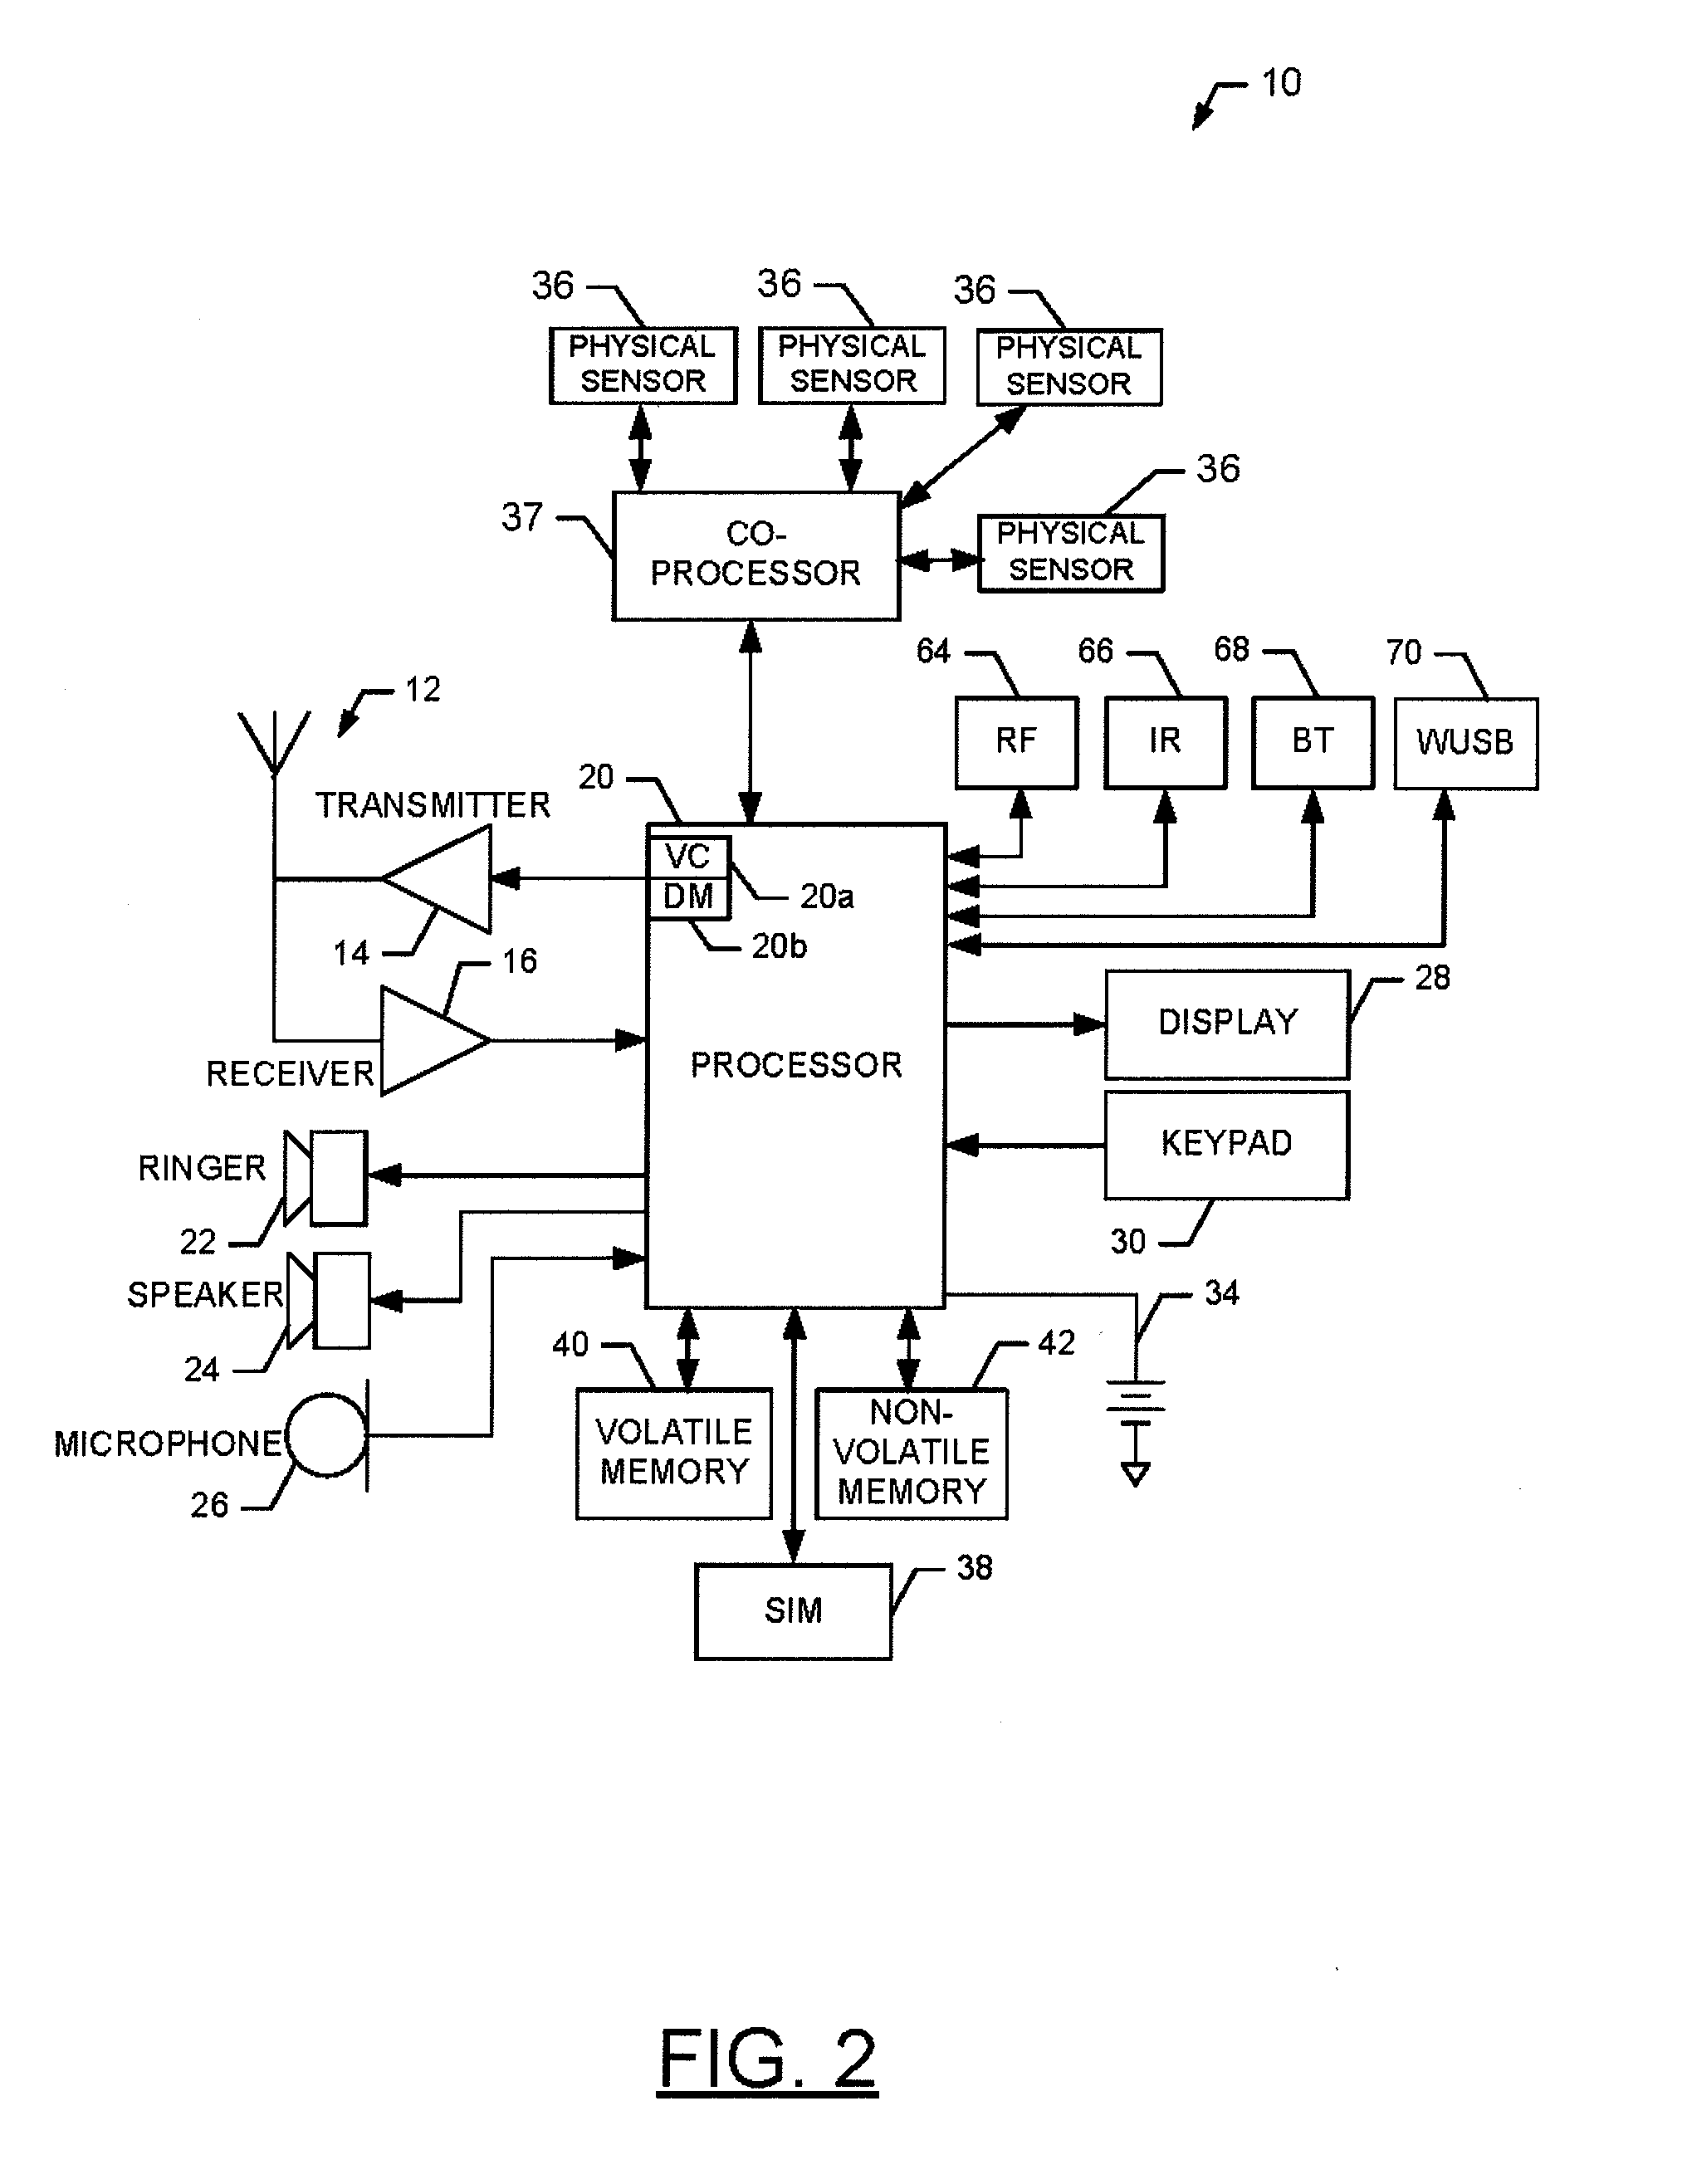 Method and apparatus for providing context-based power consumption control